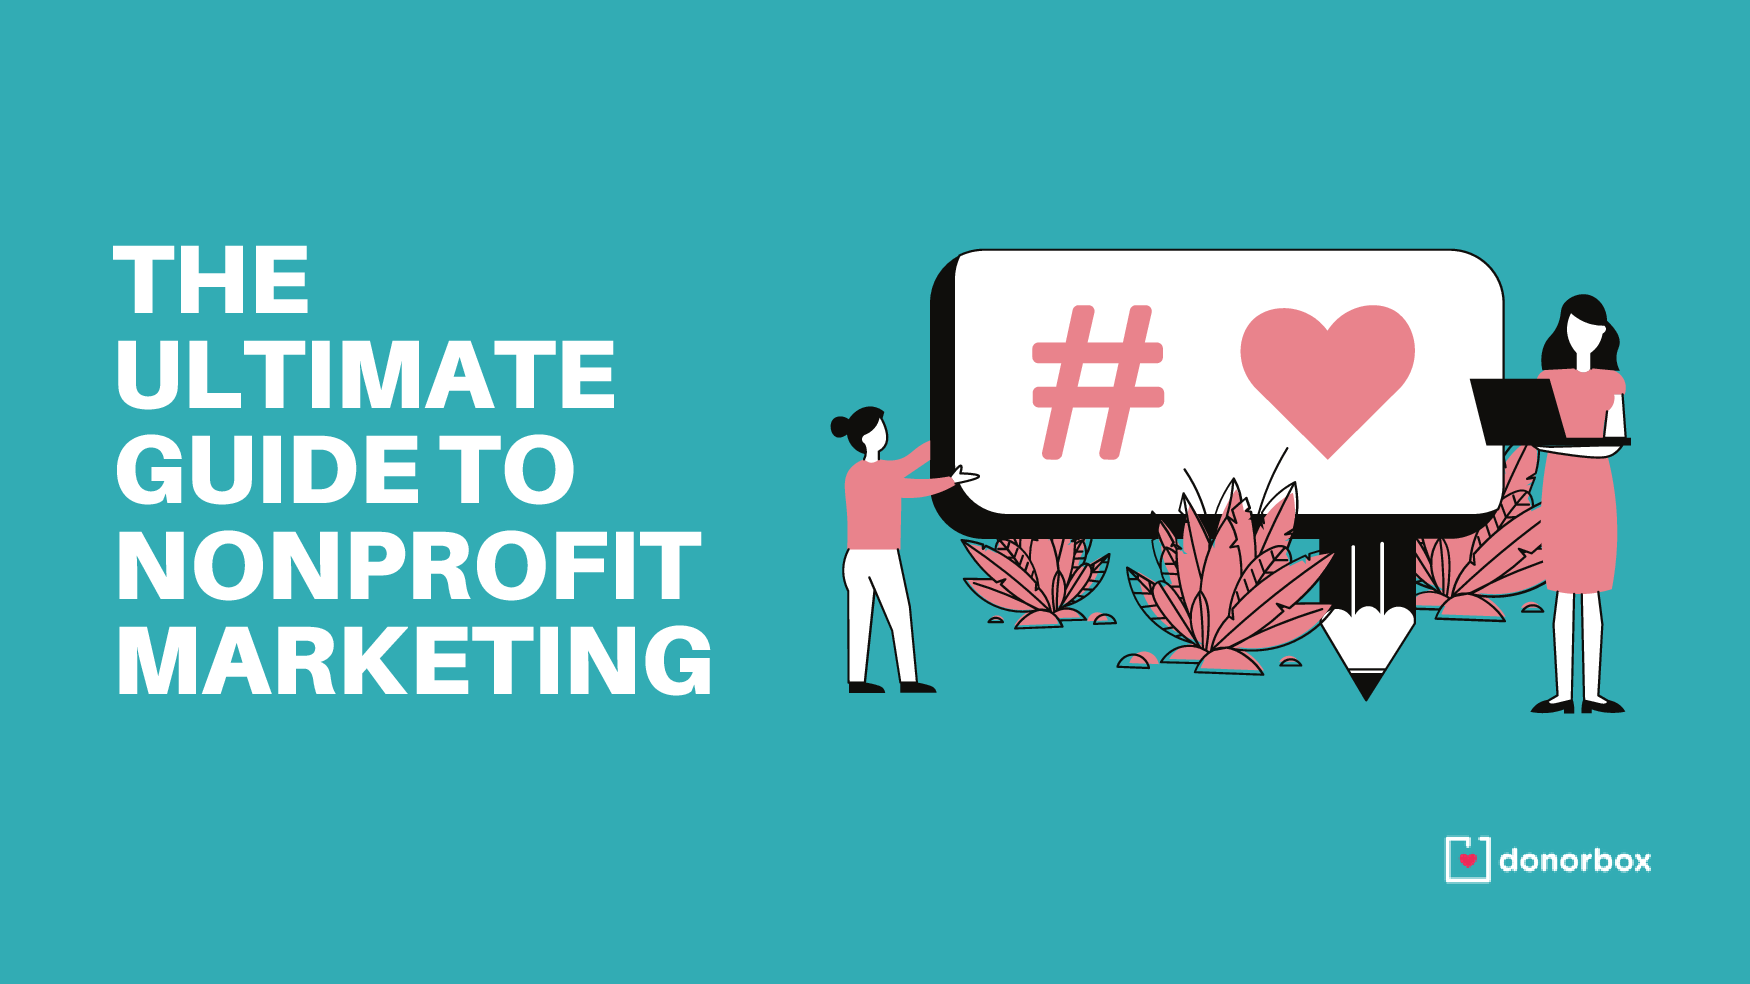 The Ultimate Guide to Nonprofit Marketing to Get More Donations | Donorbox